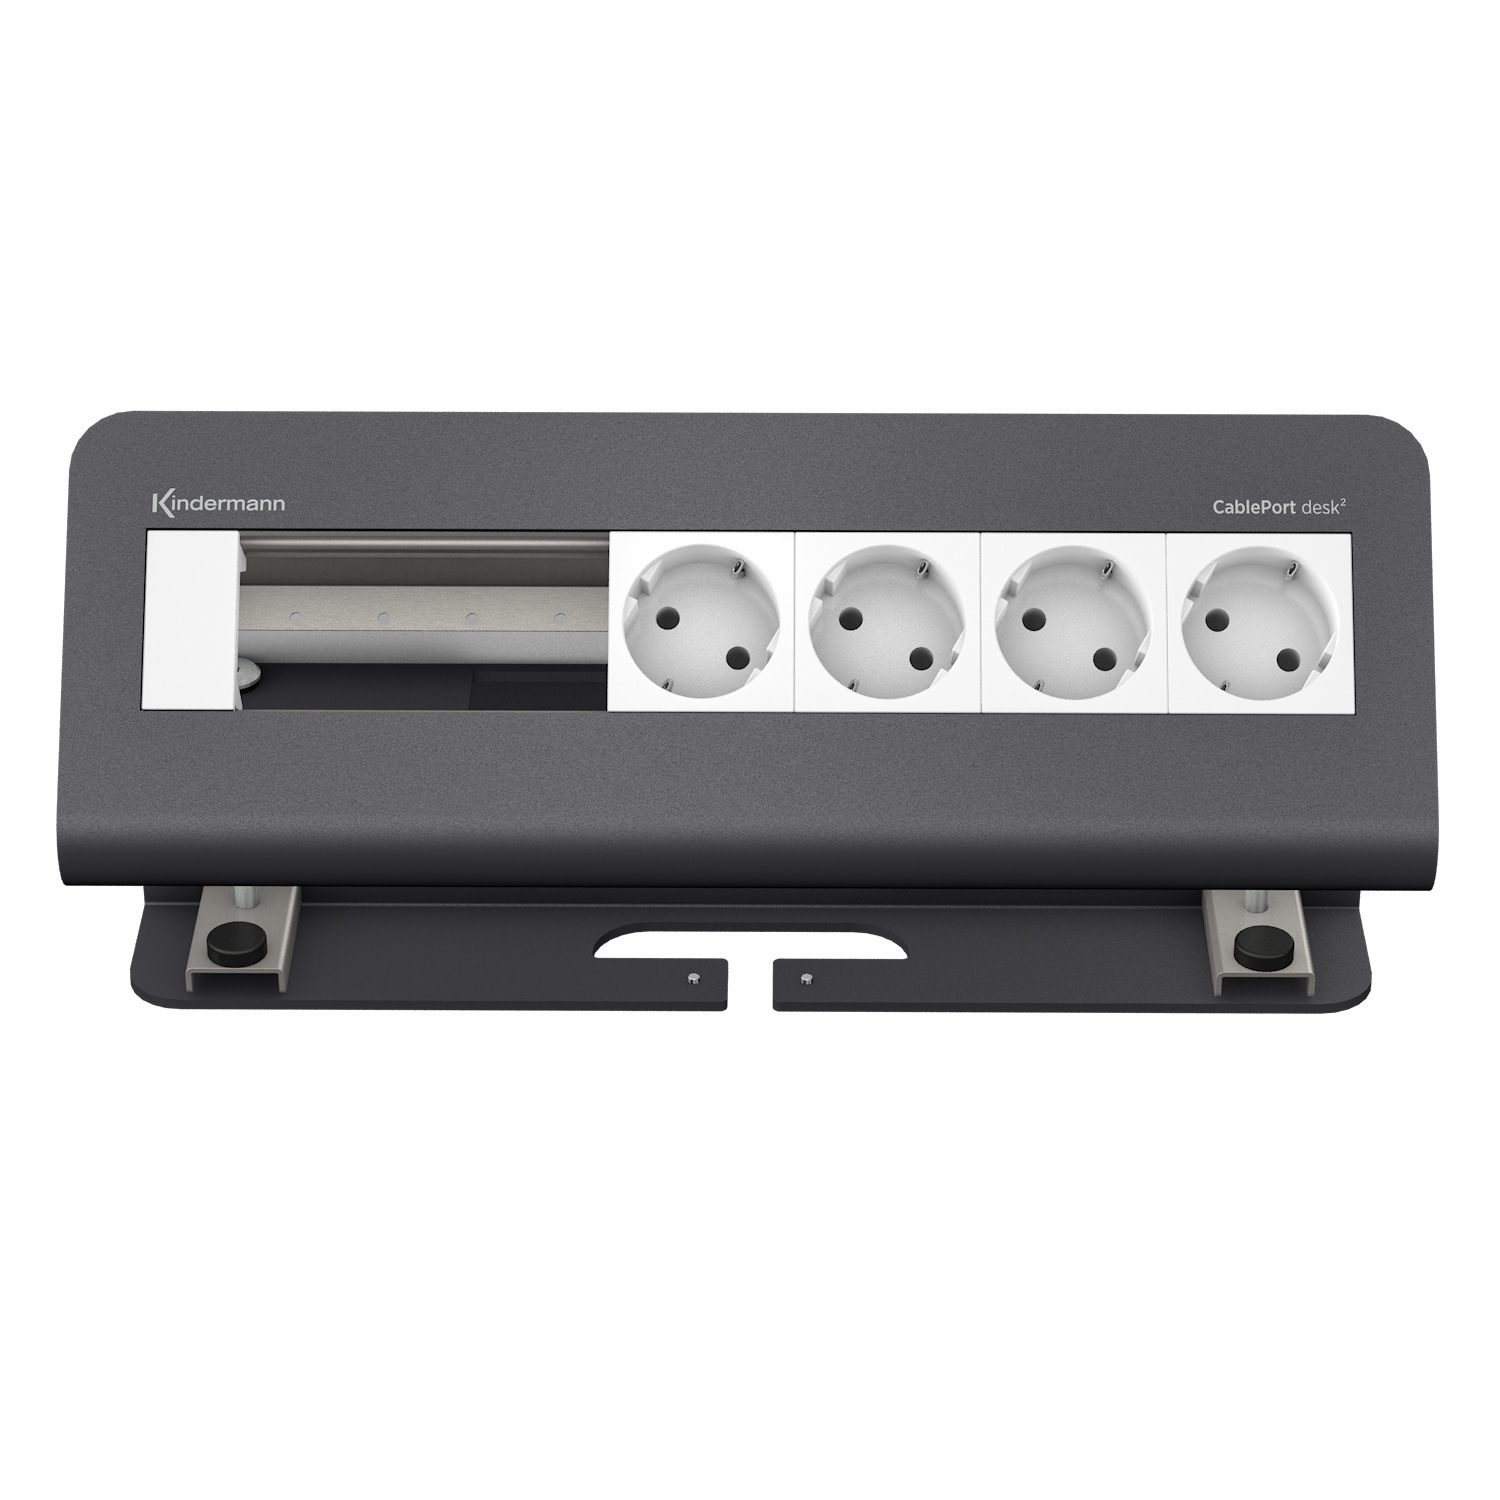 CablePort desk² 6-way 4 x power